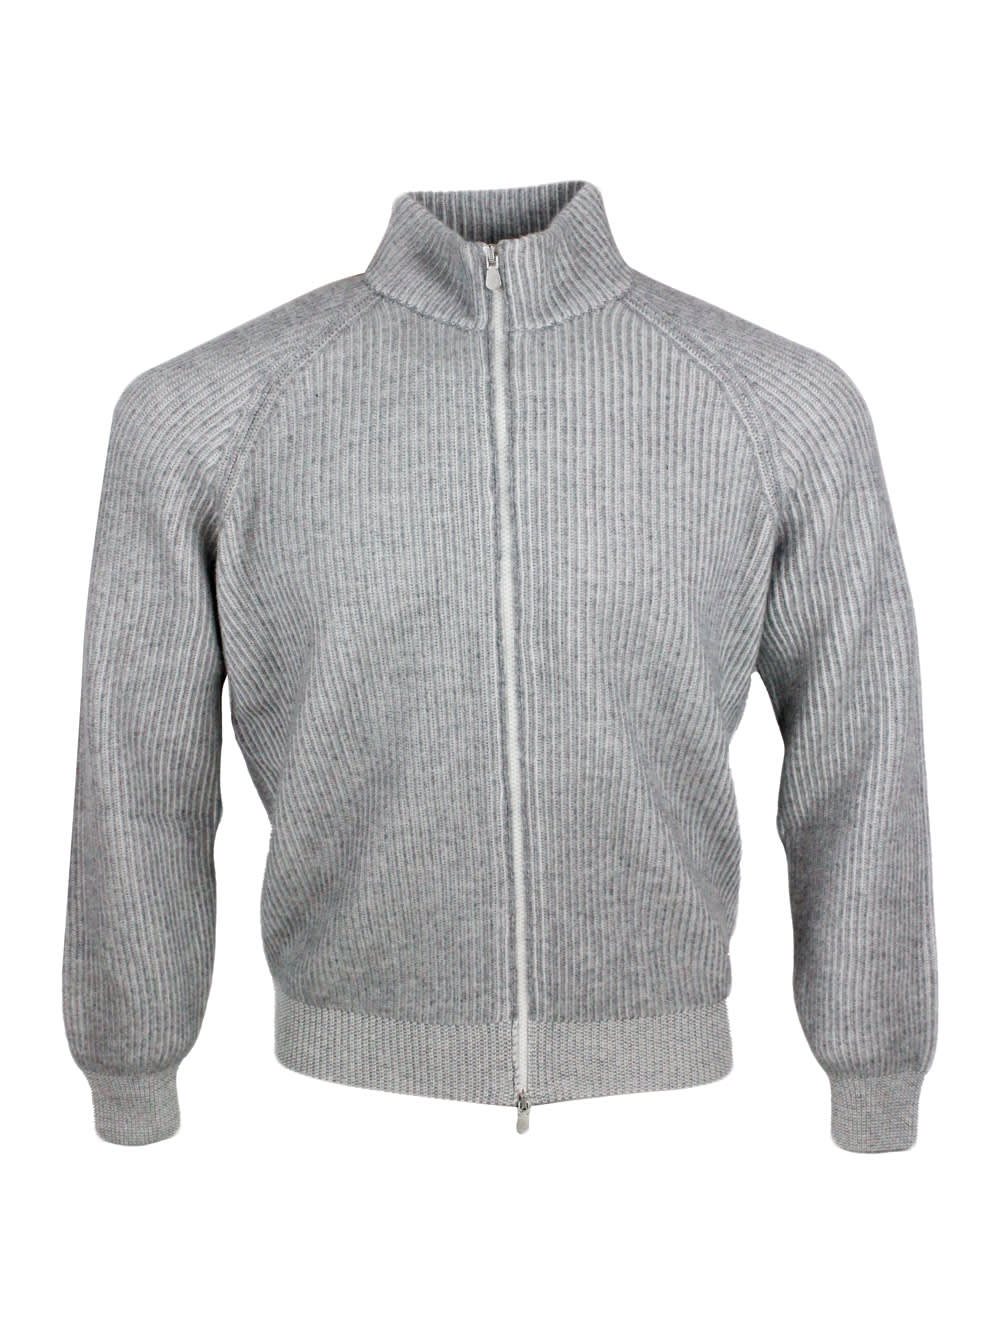 BRUNELLO CUCINELLI ZIPPED CARDIGAN SWEATER WITH HIGH VANISÉ COLLAR IN PURE AND FINE CASHMERE